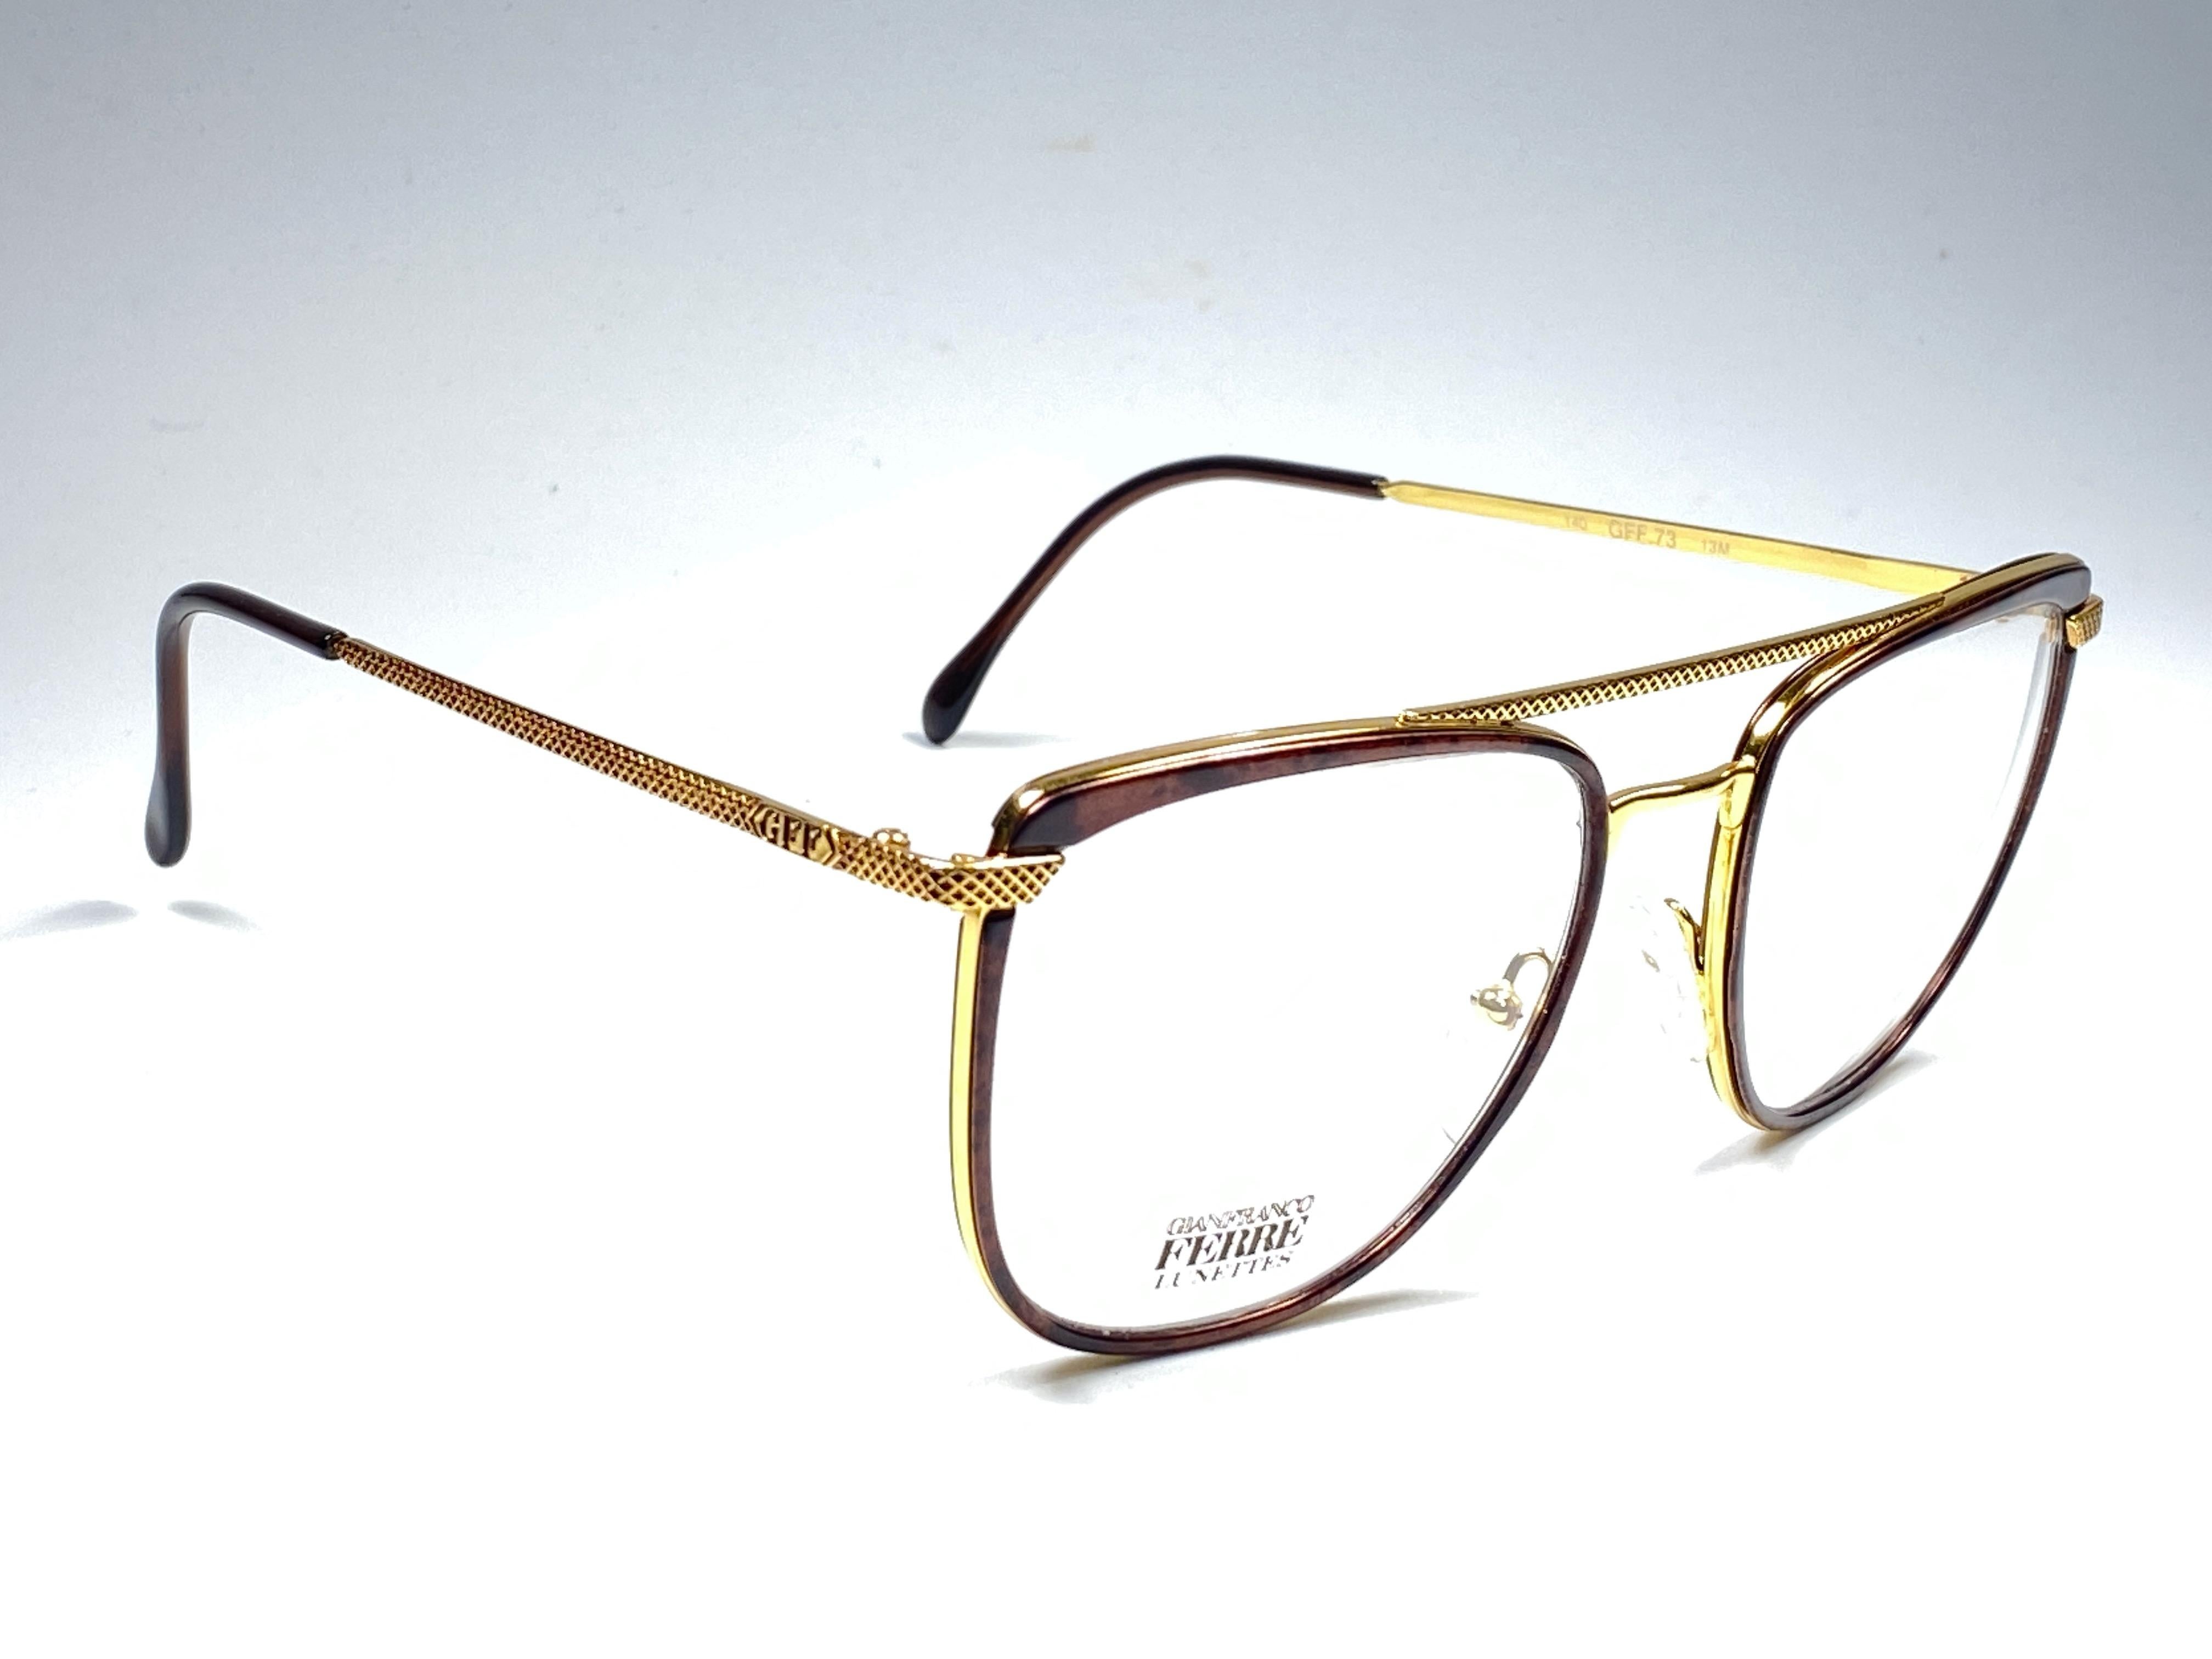 New vintage Gianfranco Ferre tortoise with gold details frame ready for prescription lenses.

New, never worn or displayed. 

 Made in Italy.

MEASUREMENTS 



FRONT : 14 CMS

LENS HEIGHT : 4.6 CMS

LENS WIDTH : 5.3 CMS